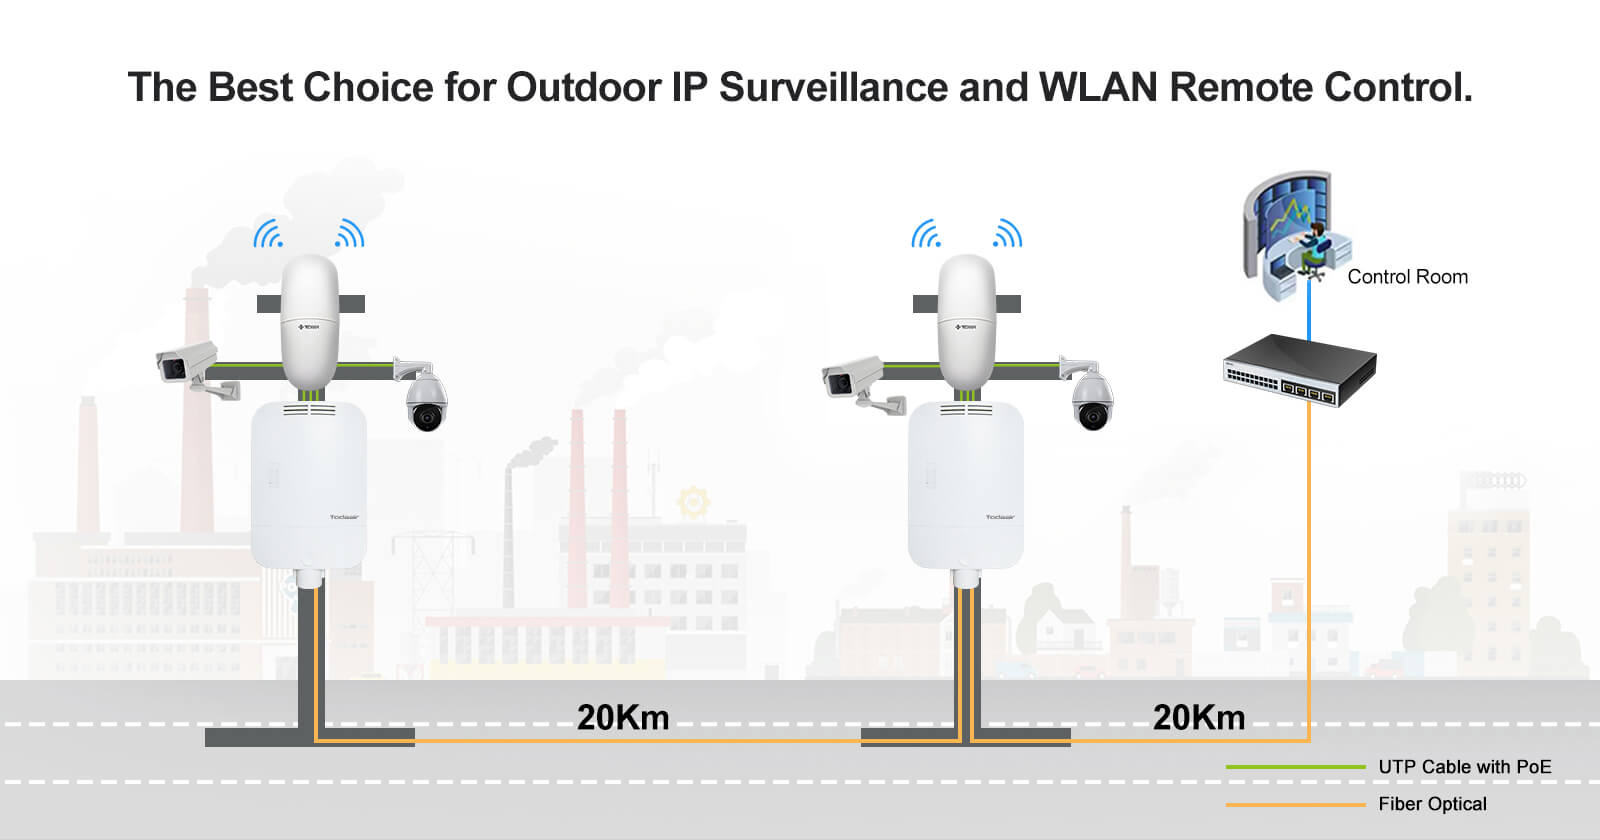 for outdoor IP camera and WLAN remote control